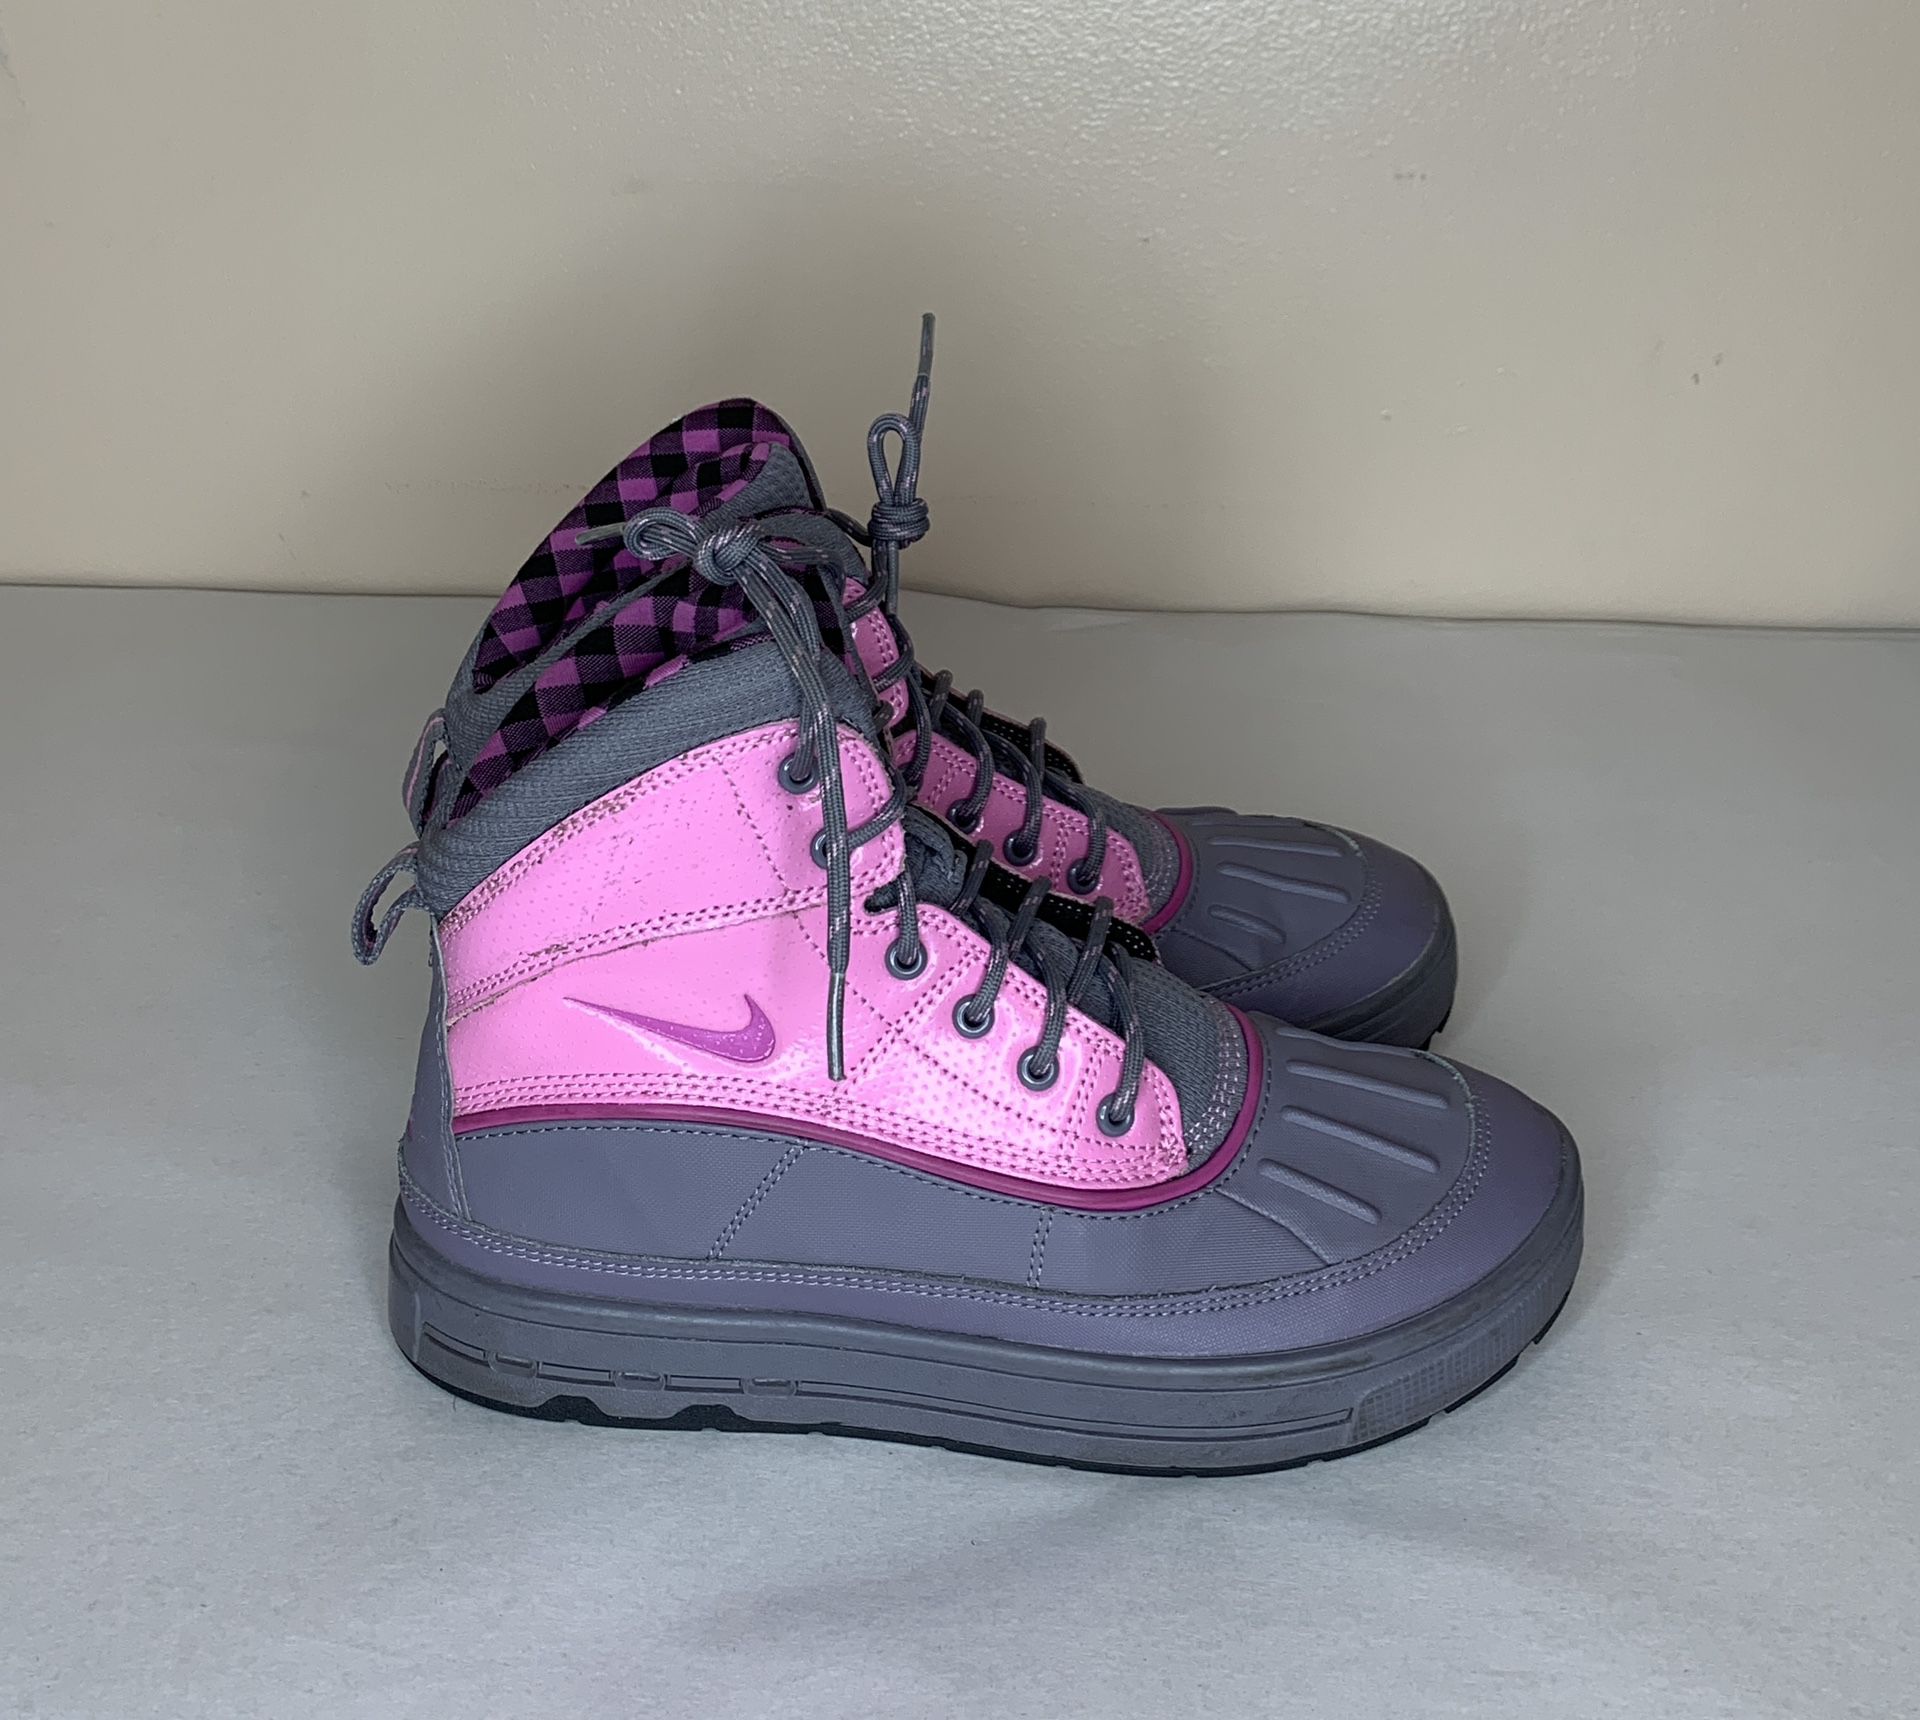 Nike Woodside 2 ACG Youth Sz 5Y Girls High Pink Shell Toe Duck Boots 524876-002 Pre-owned